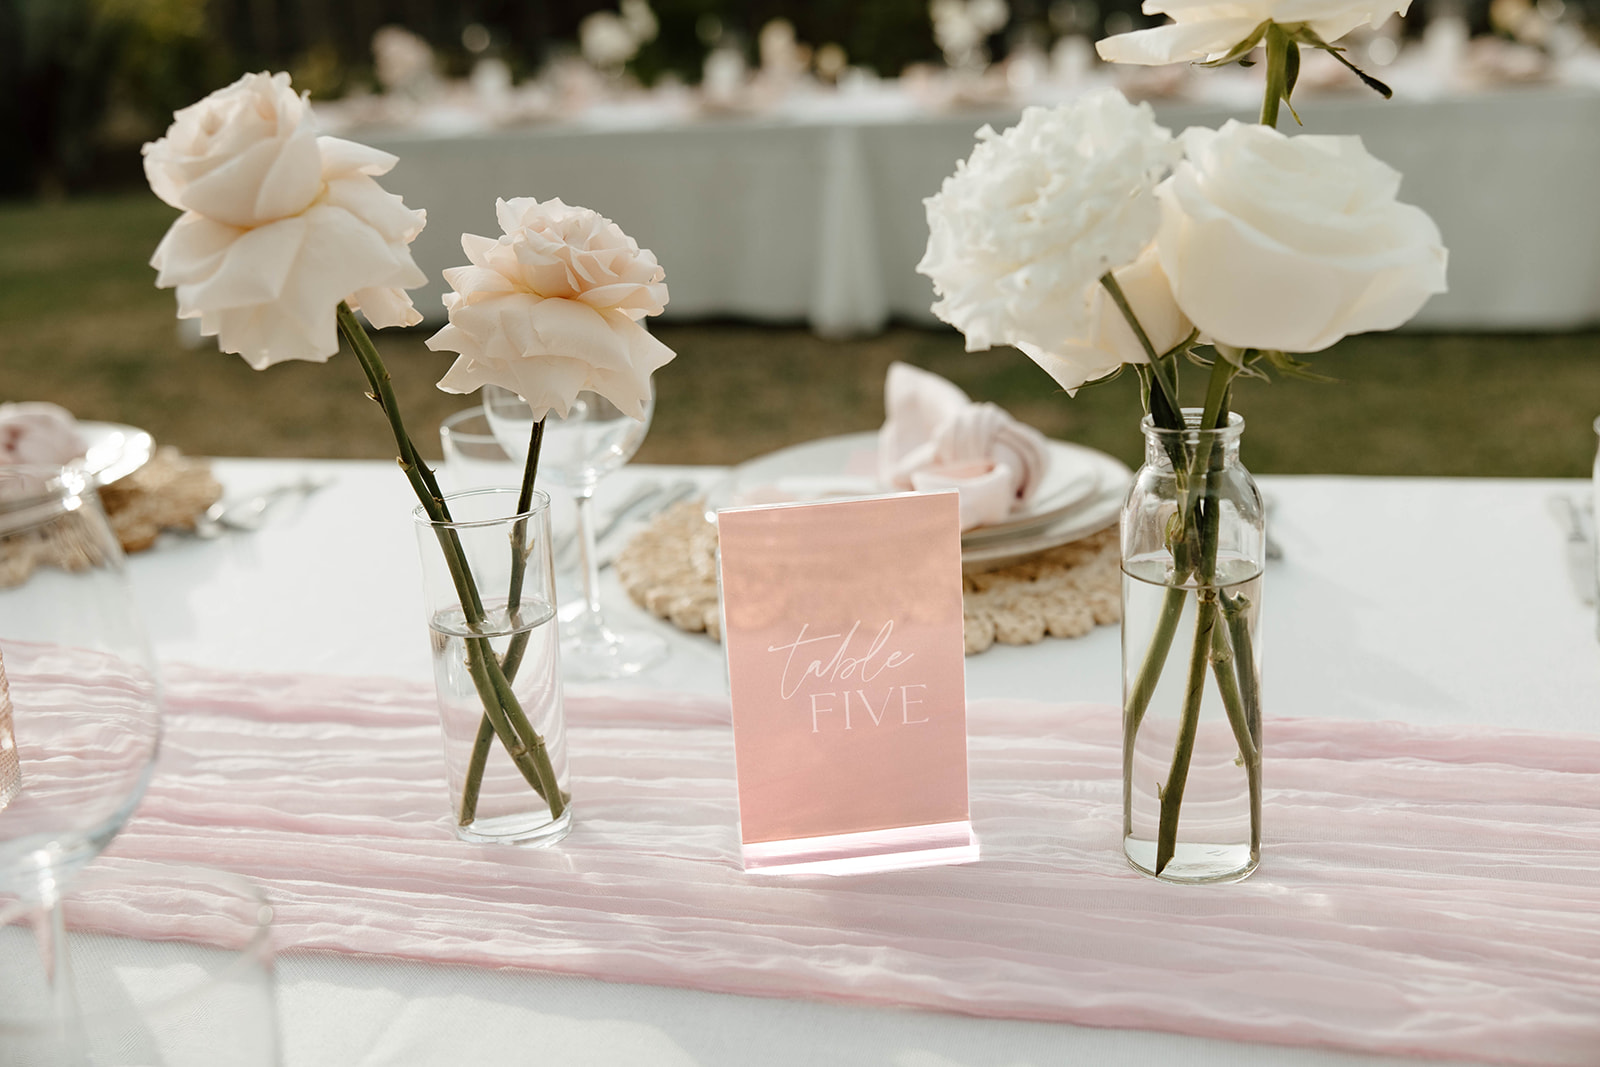 Elegant outdoor table setting with a "table five" sign, pale pink table runner, and white roses in glass vases for a cabo san lucas wedding